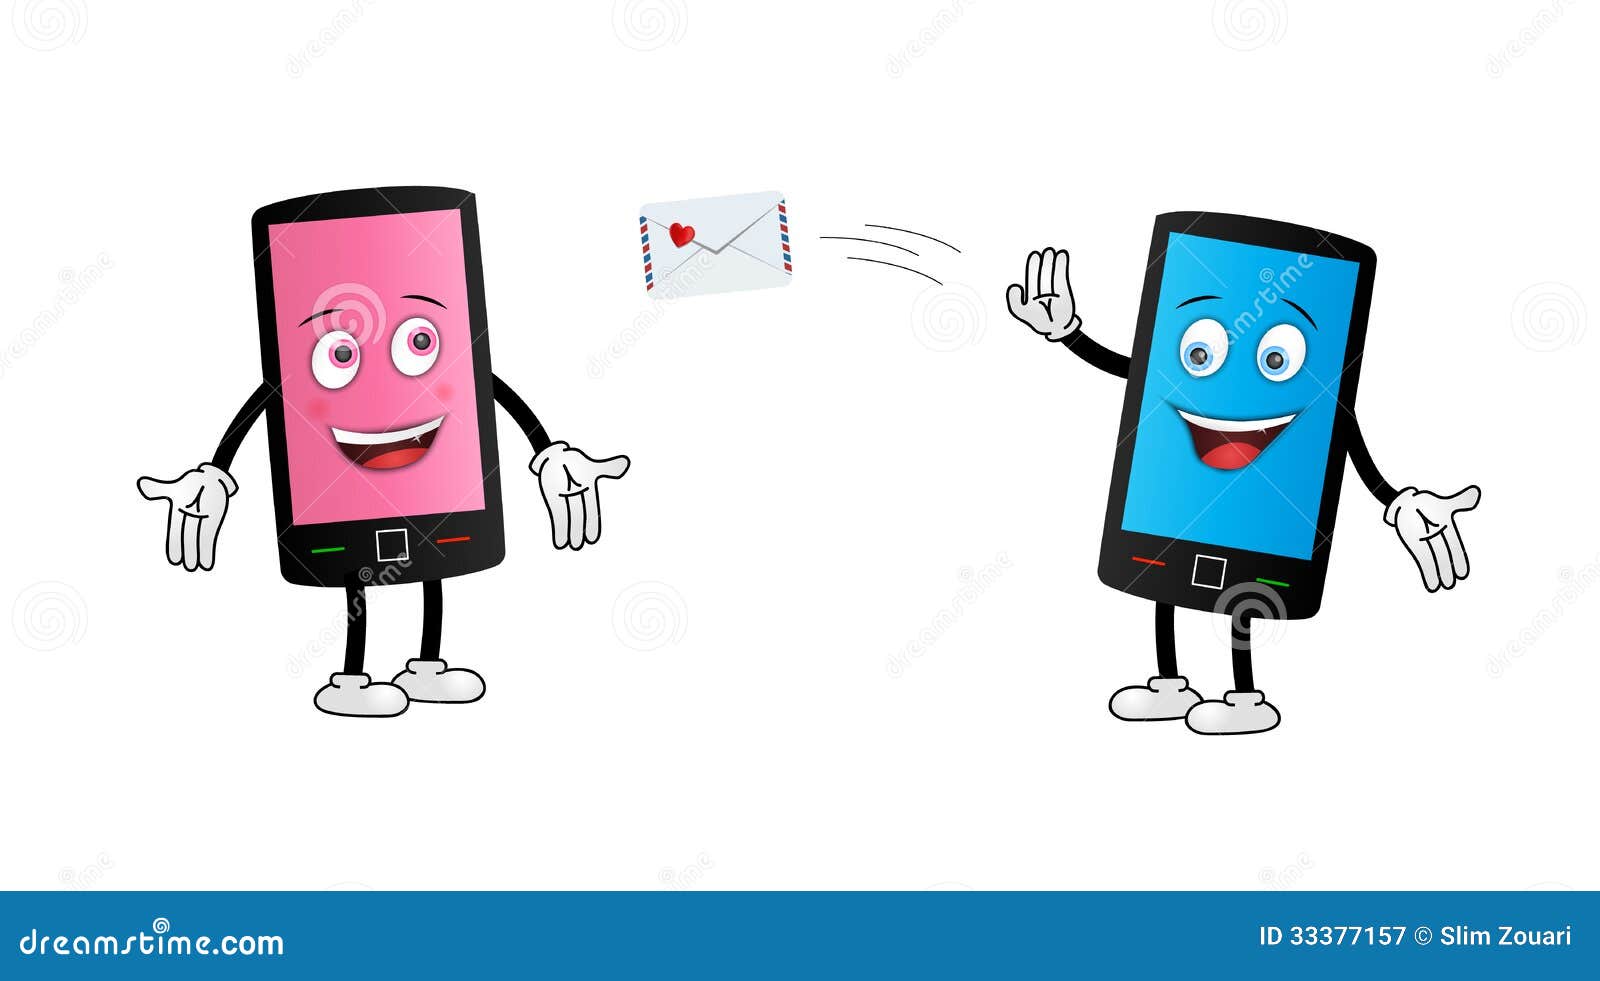 mobile phone sms clipart - photo #46